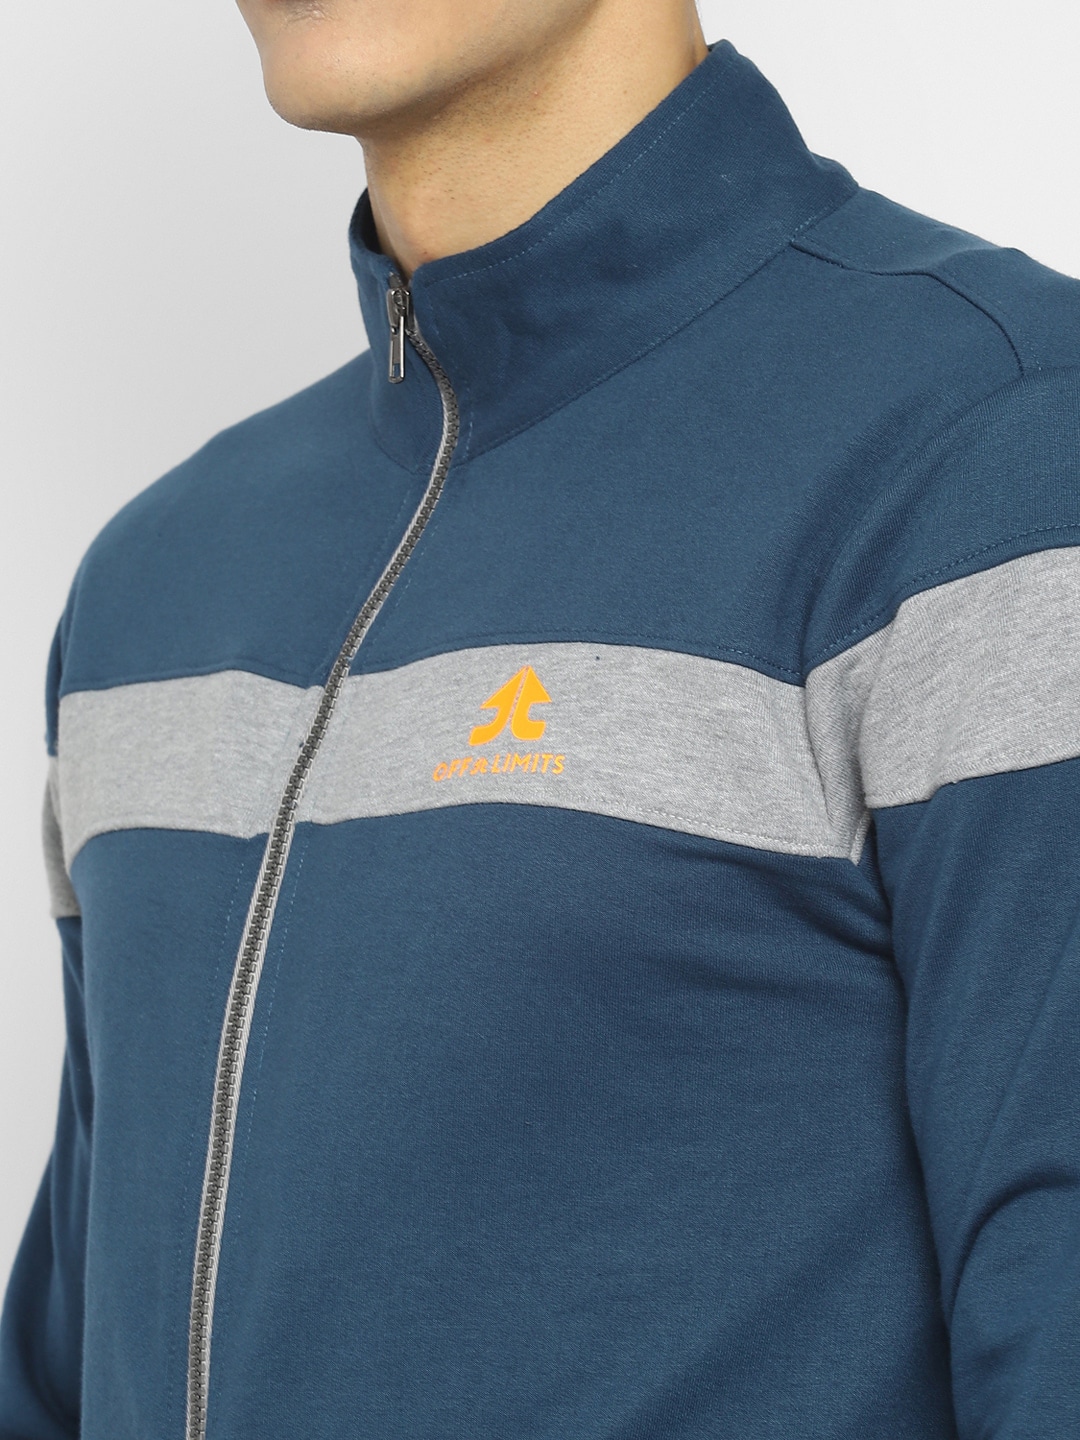 Clothing Tracksuits | OFF LIMITS Men Teal Blue & Grey Solid Tracksuit - QV84570